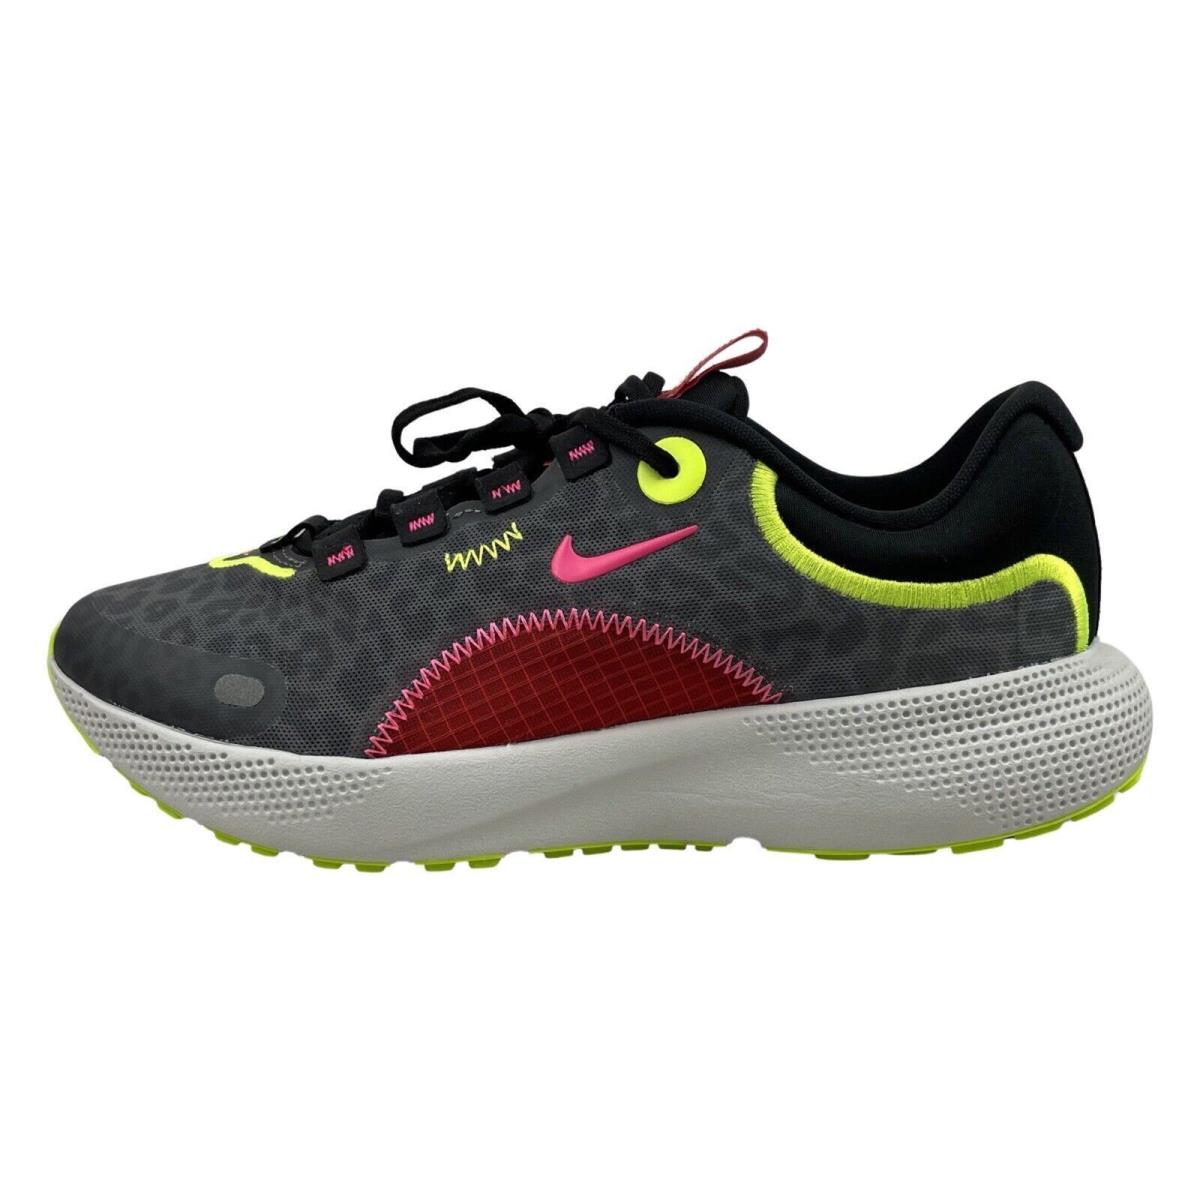 Nike Womens React Escape RN Running Shoes DM8074 001 Box NO Lid - PARTICLE GREY /HYPHER PINK BLACK